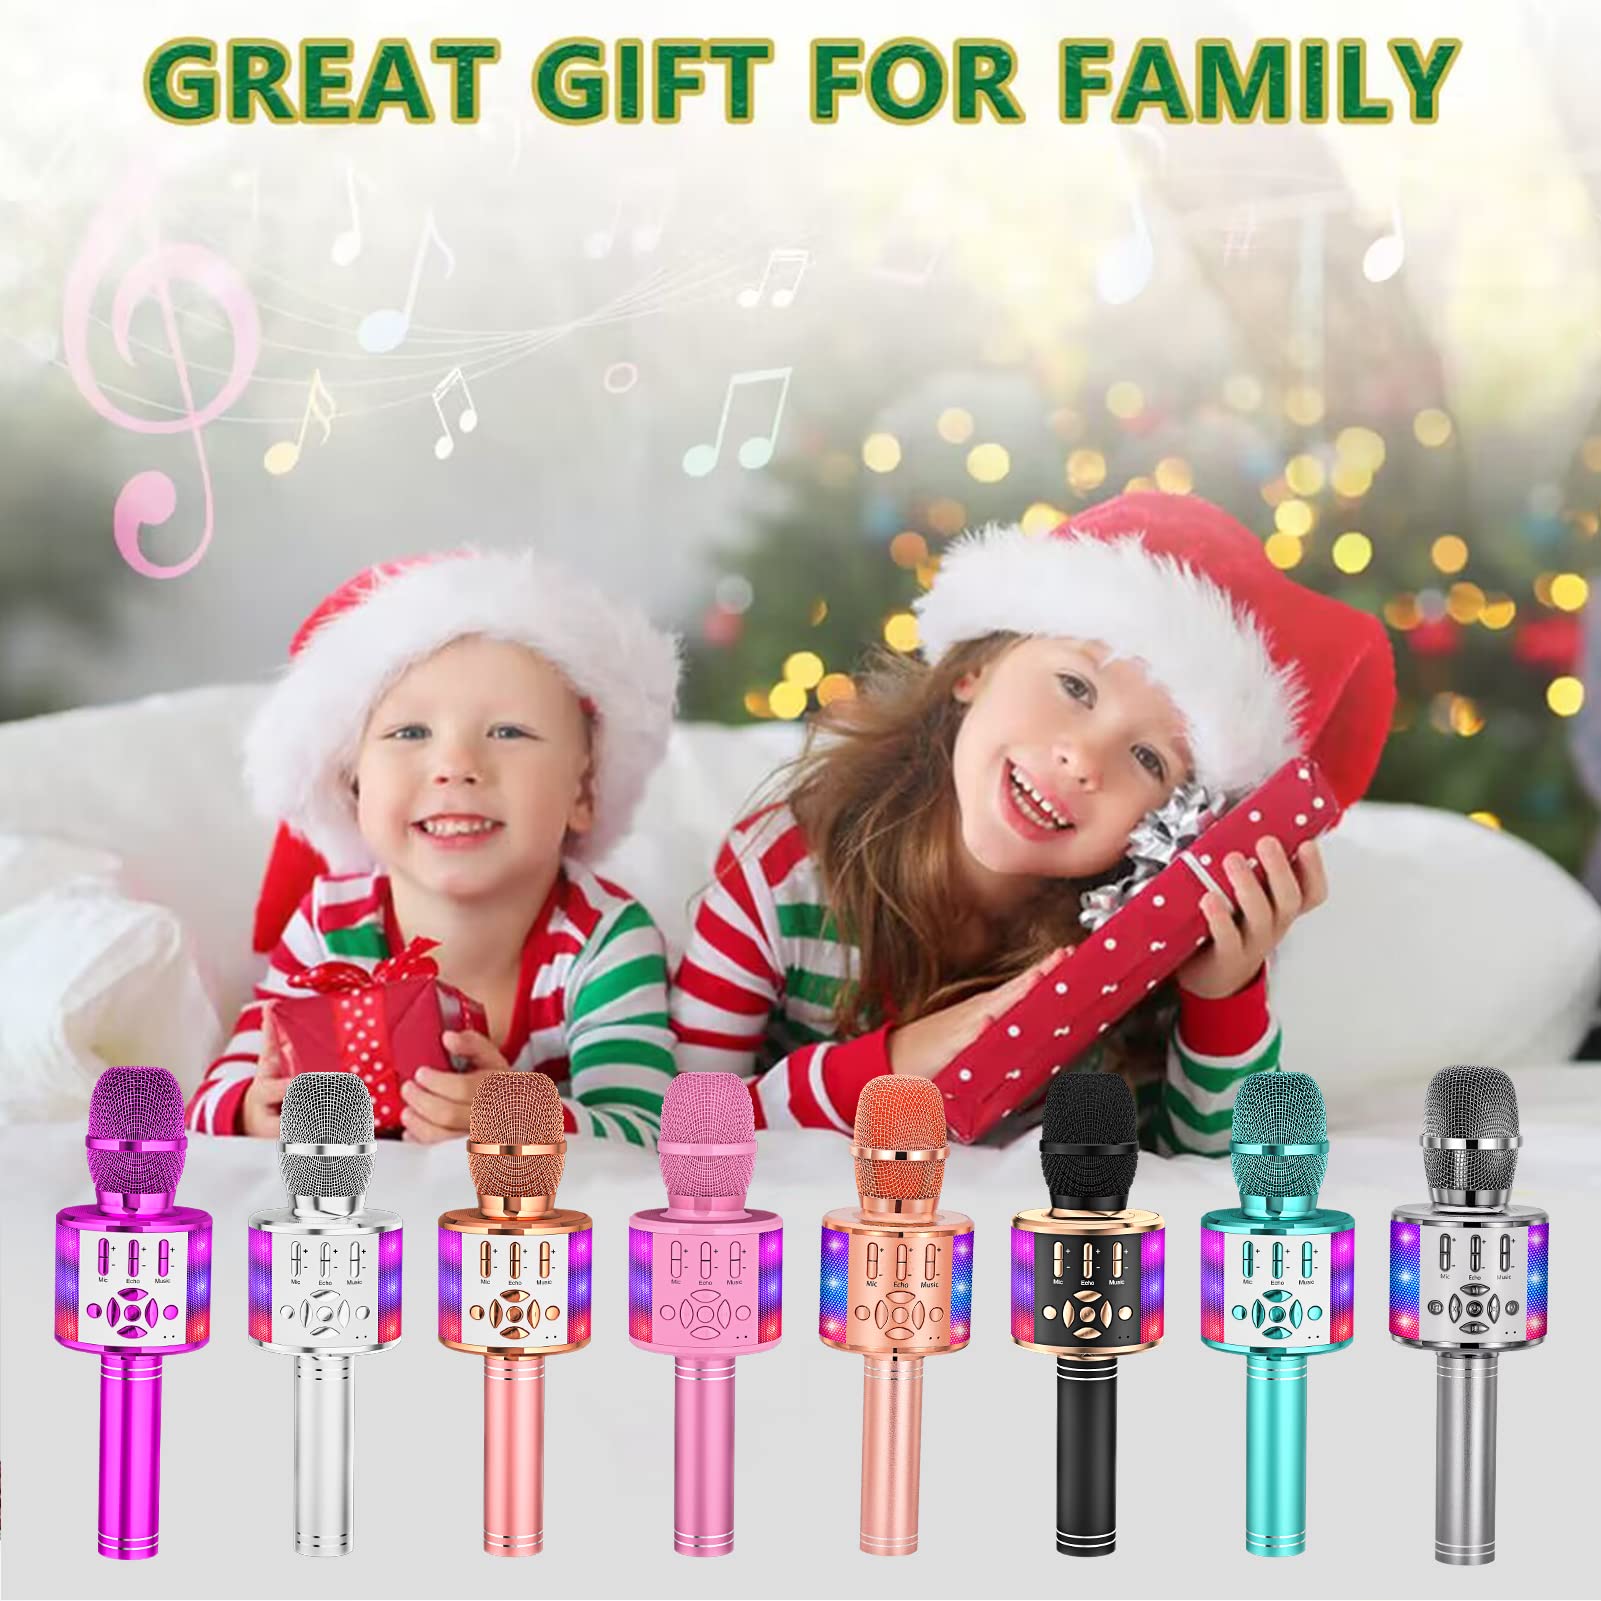 Amazmic Kids Karaoke Microphone Machine Toys for Girls Bluetooth Microphone Portable Karaoke Machine with LED Light, Birthday Gift for Girls Boys 3-12 Year Old Adults Birthday Party, Home KTV(Blue)